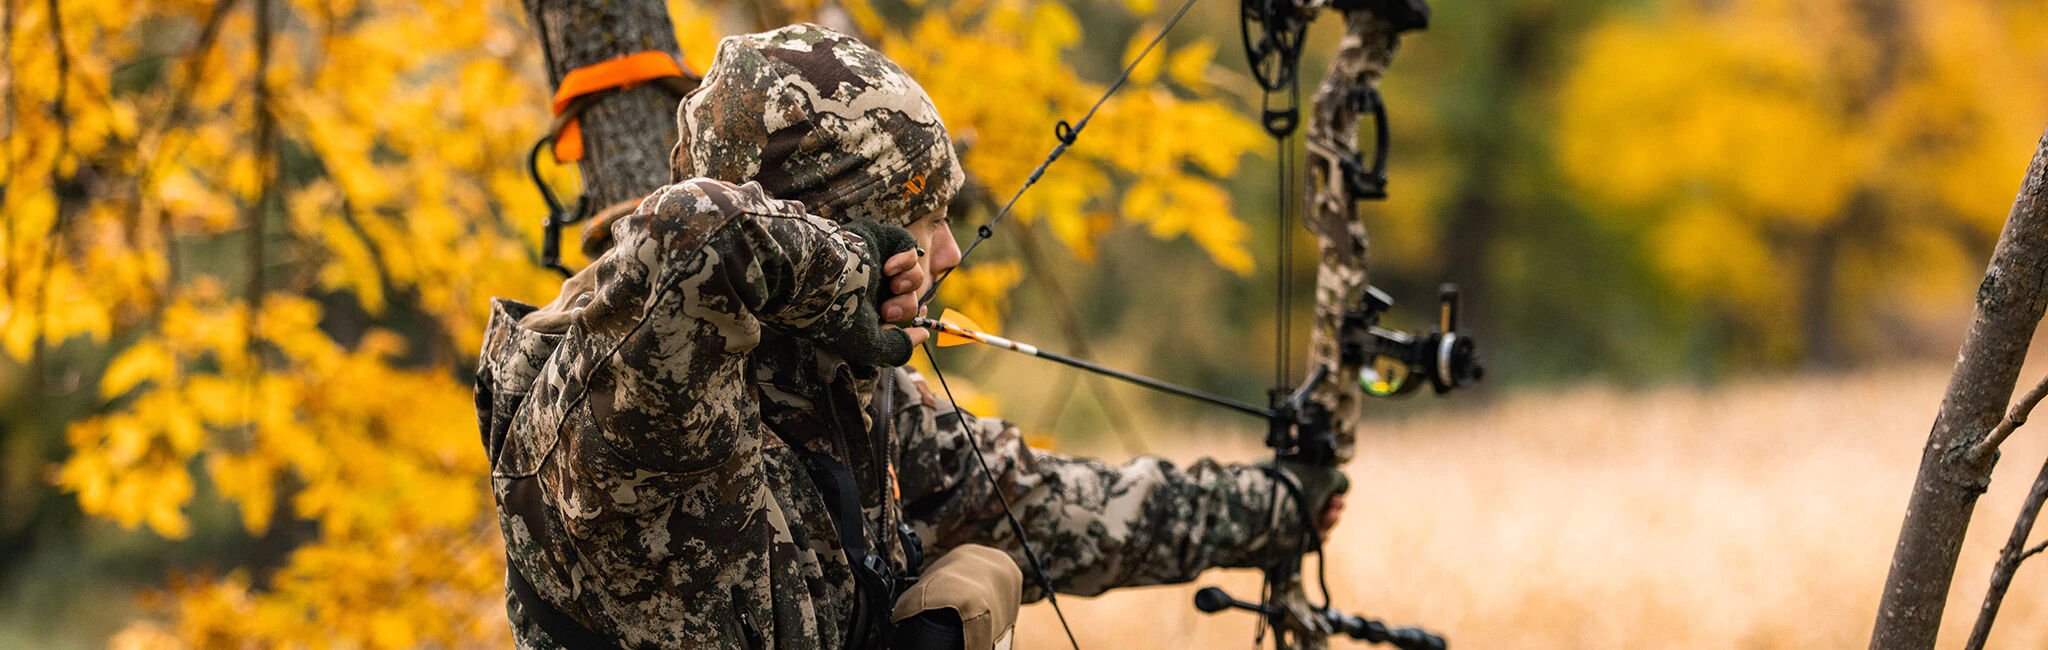 Up To 40% Off Whitetail Hunting Gear